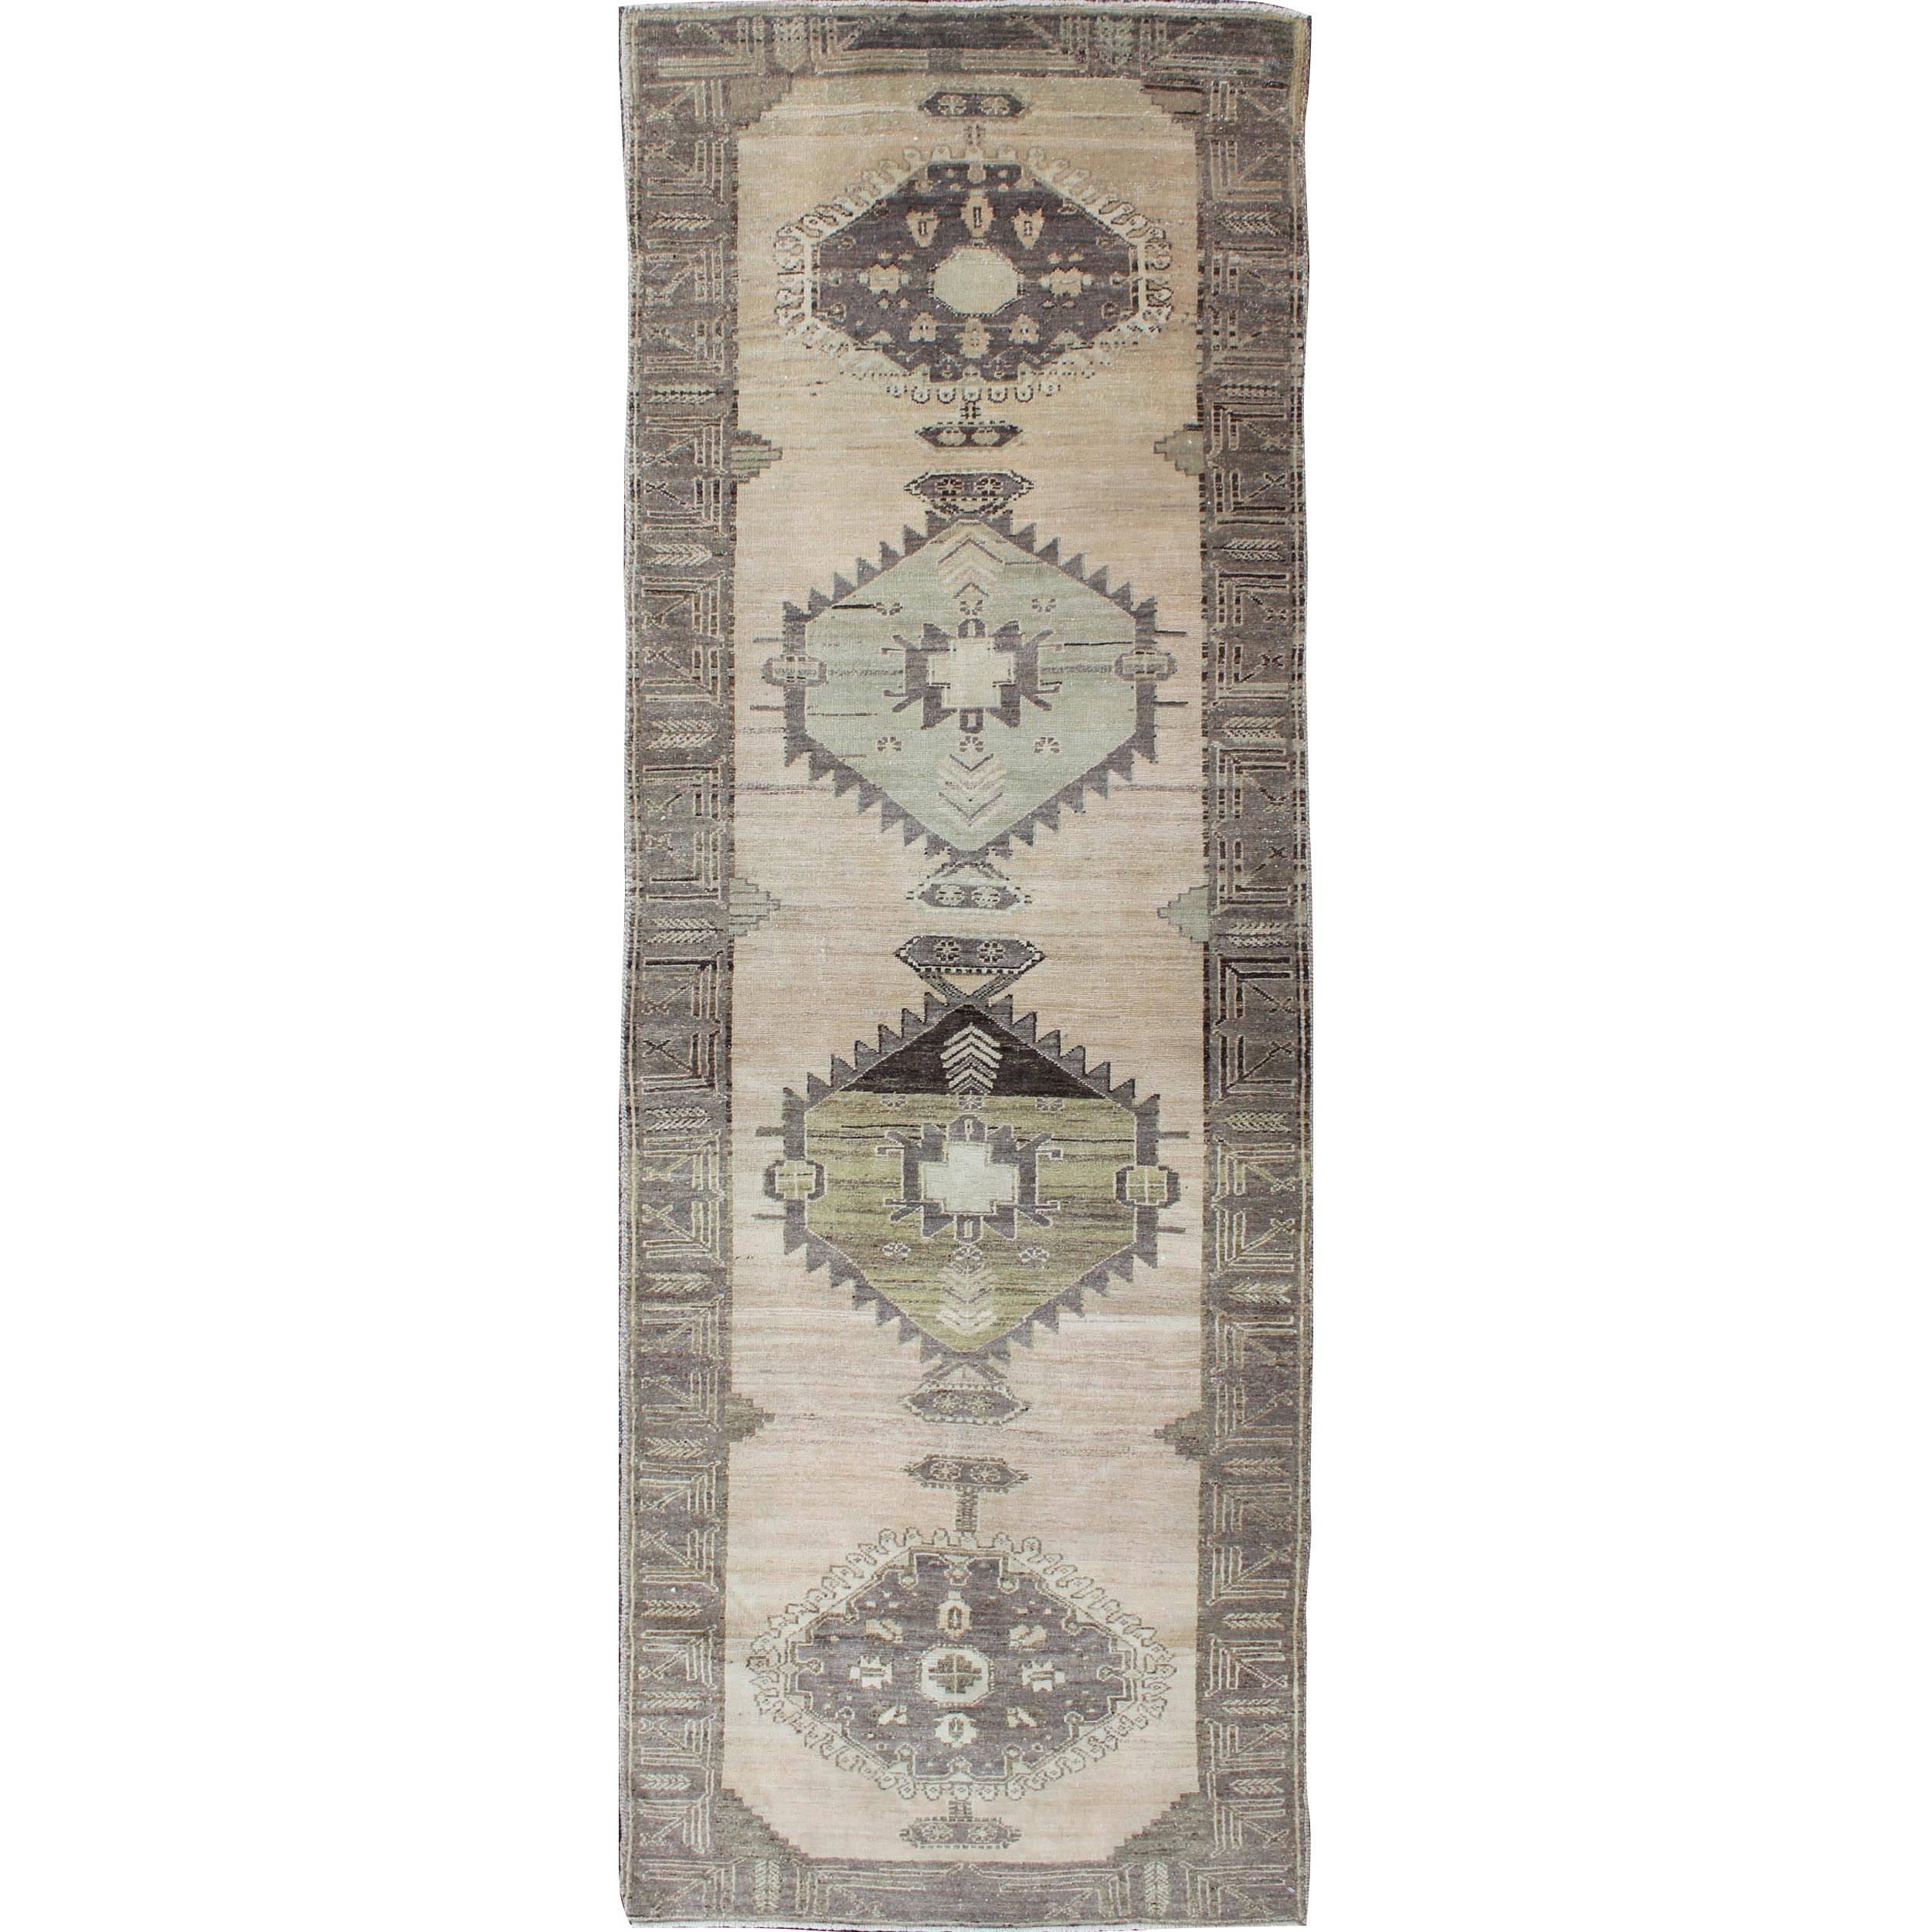 Vintage Oushak Runner Influence by Ottoman Designs in Neutral Colors